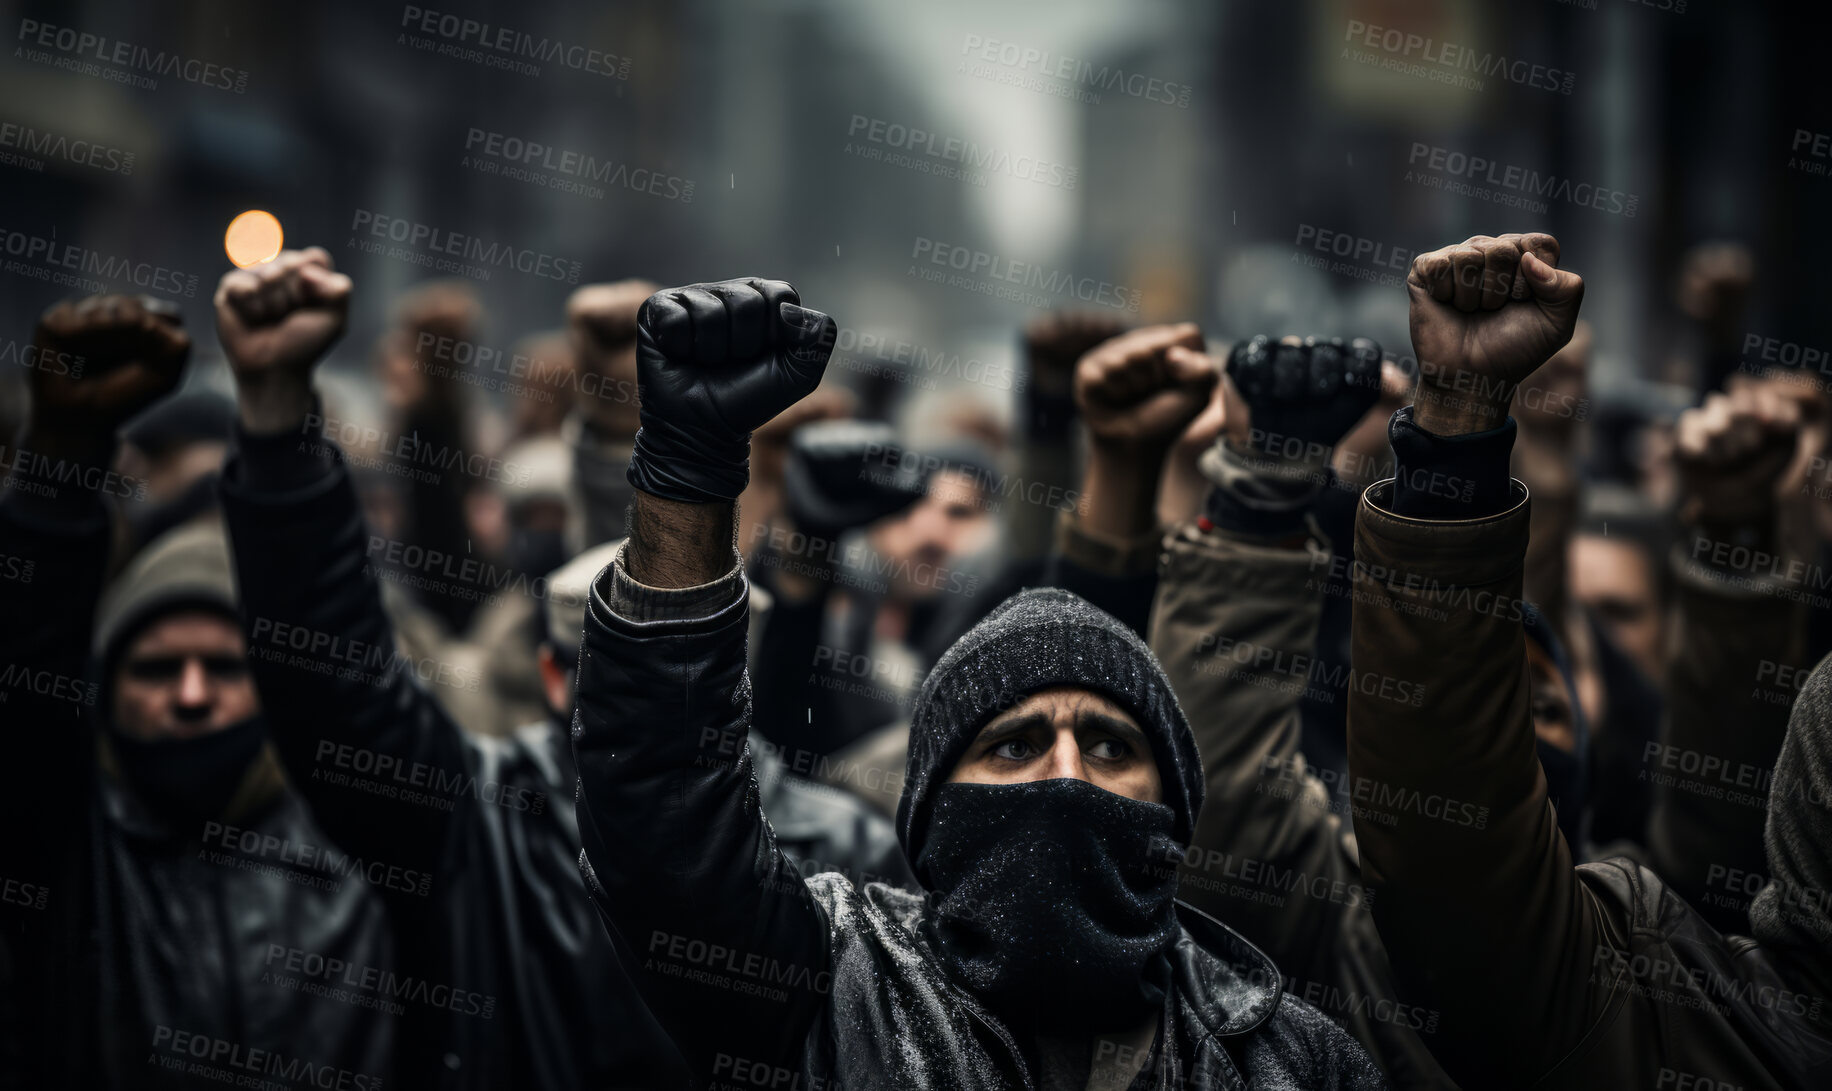 Buy stock photo Protesters raising fists in city. Human rights, Activism concept.